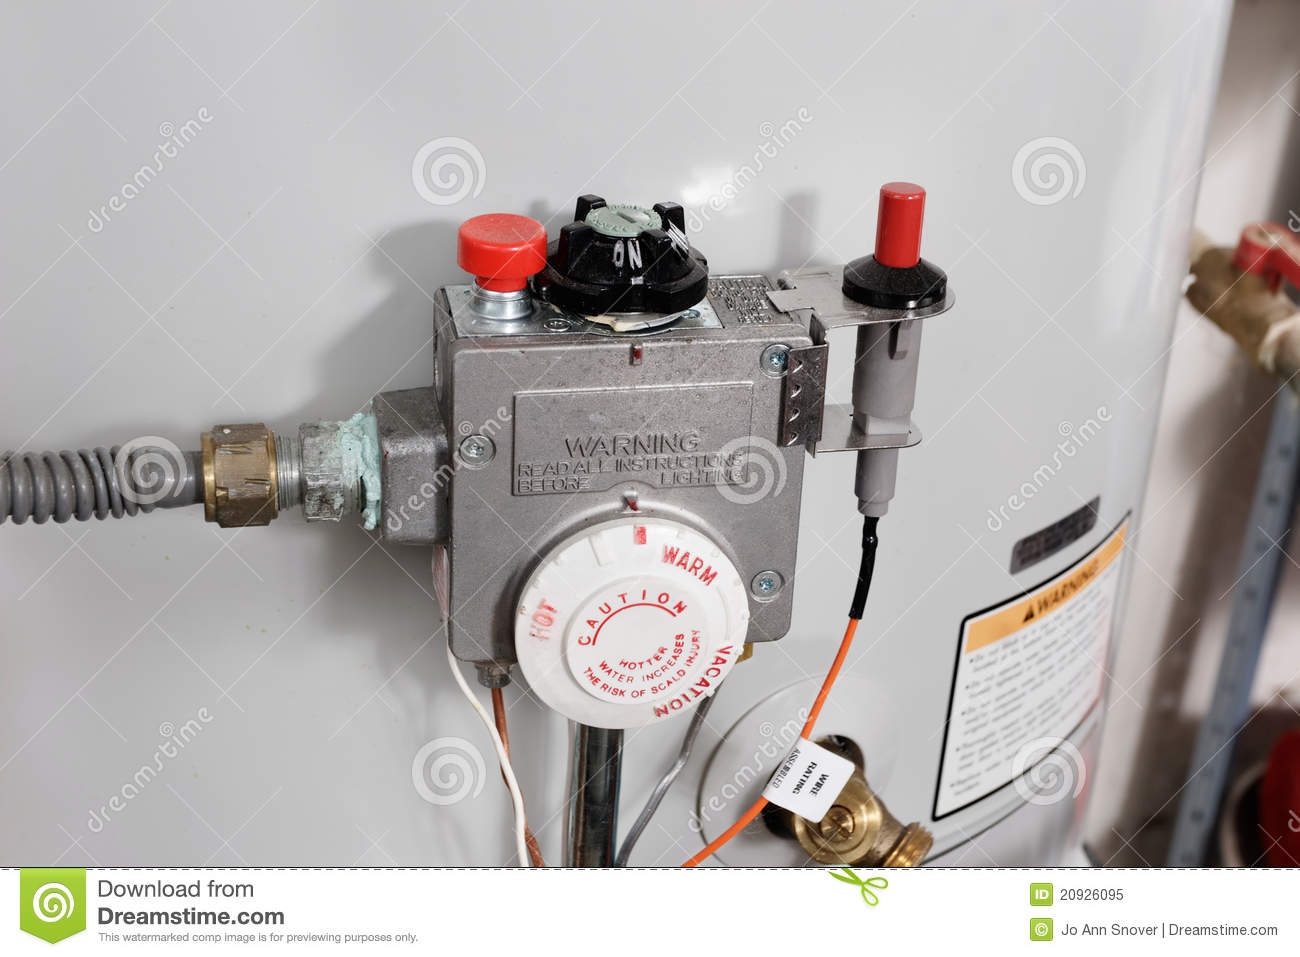 Water Heater Controls Royalty Free Stock Photo   Image  20926095